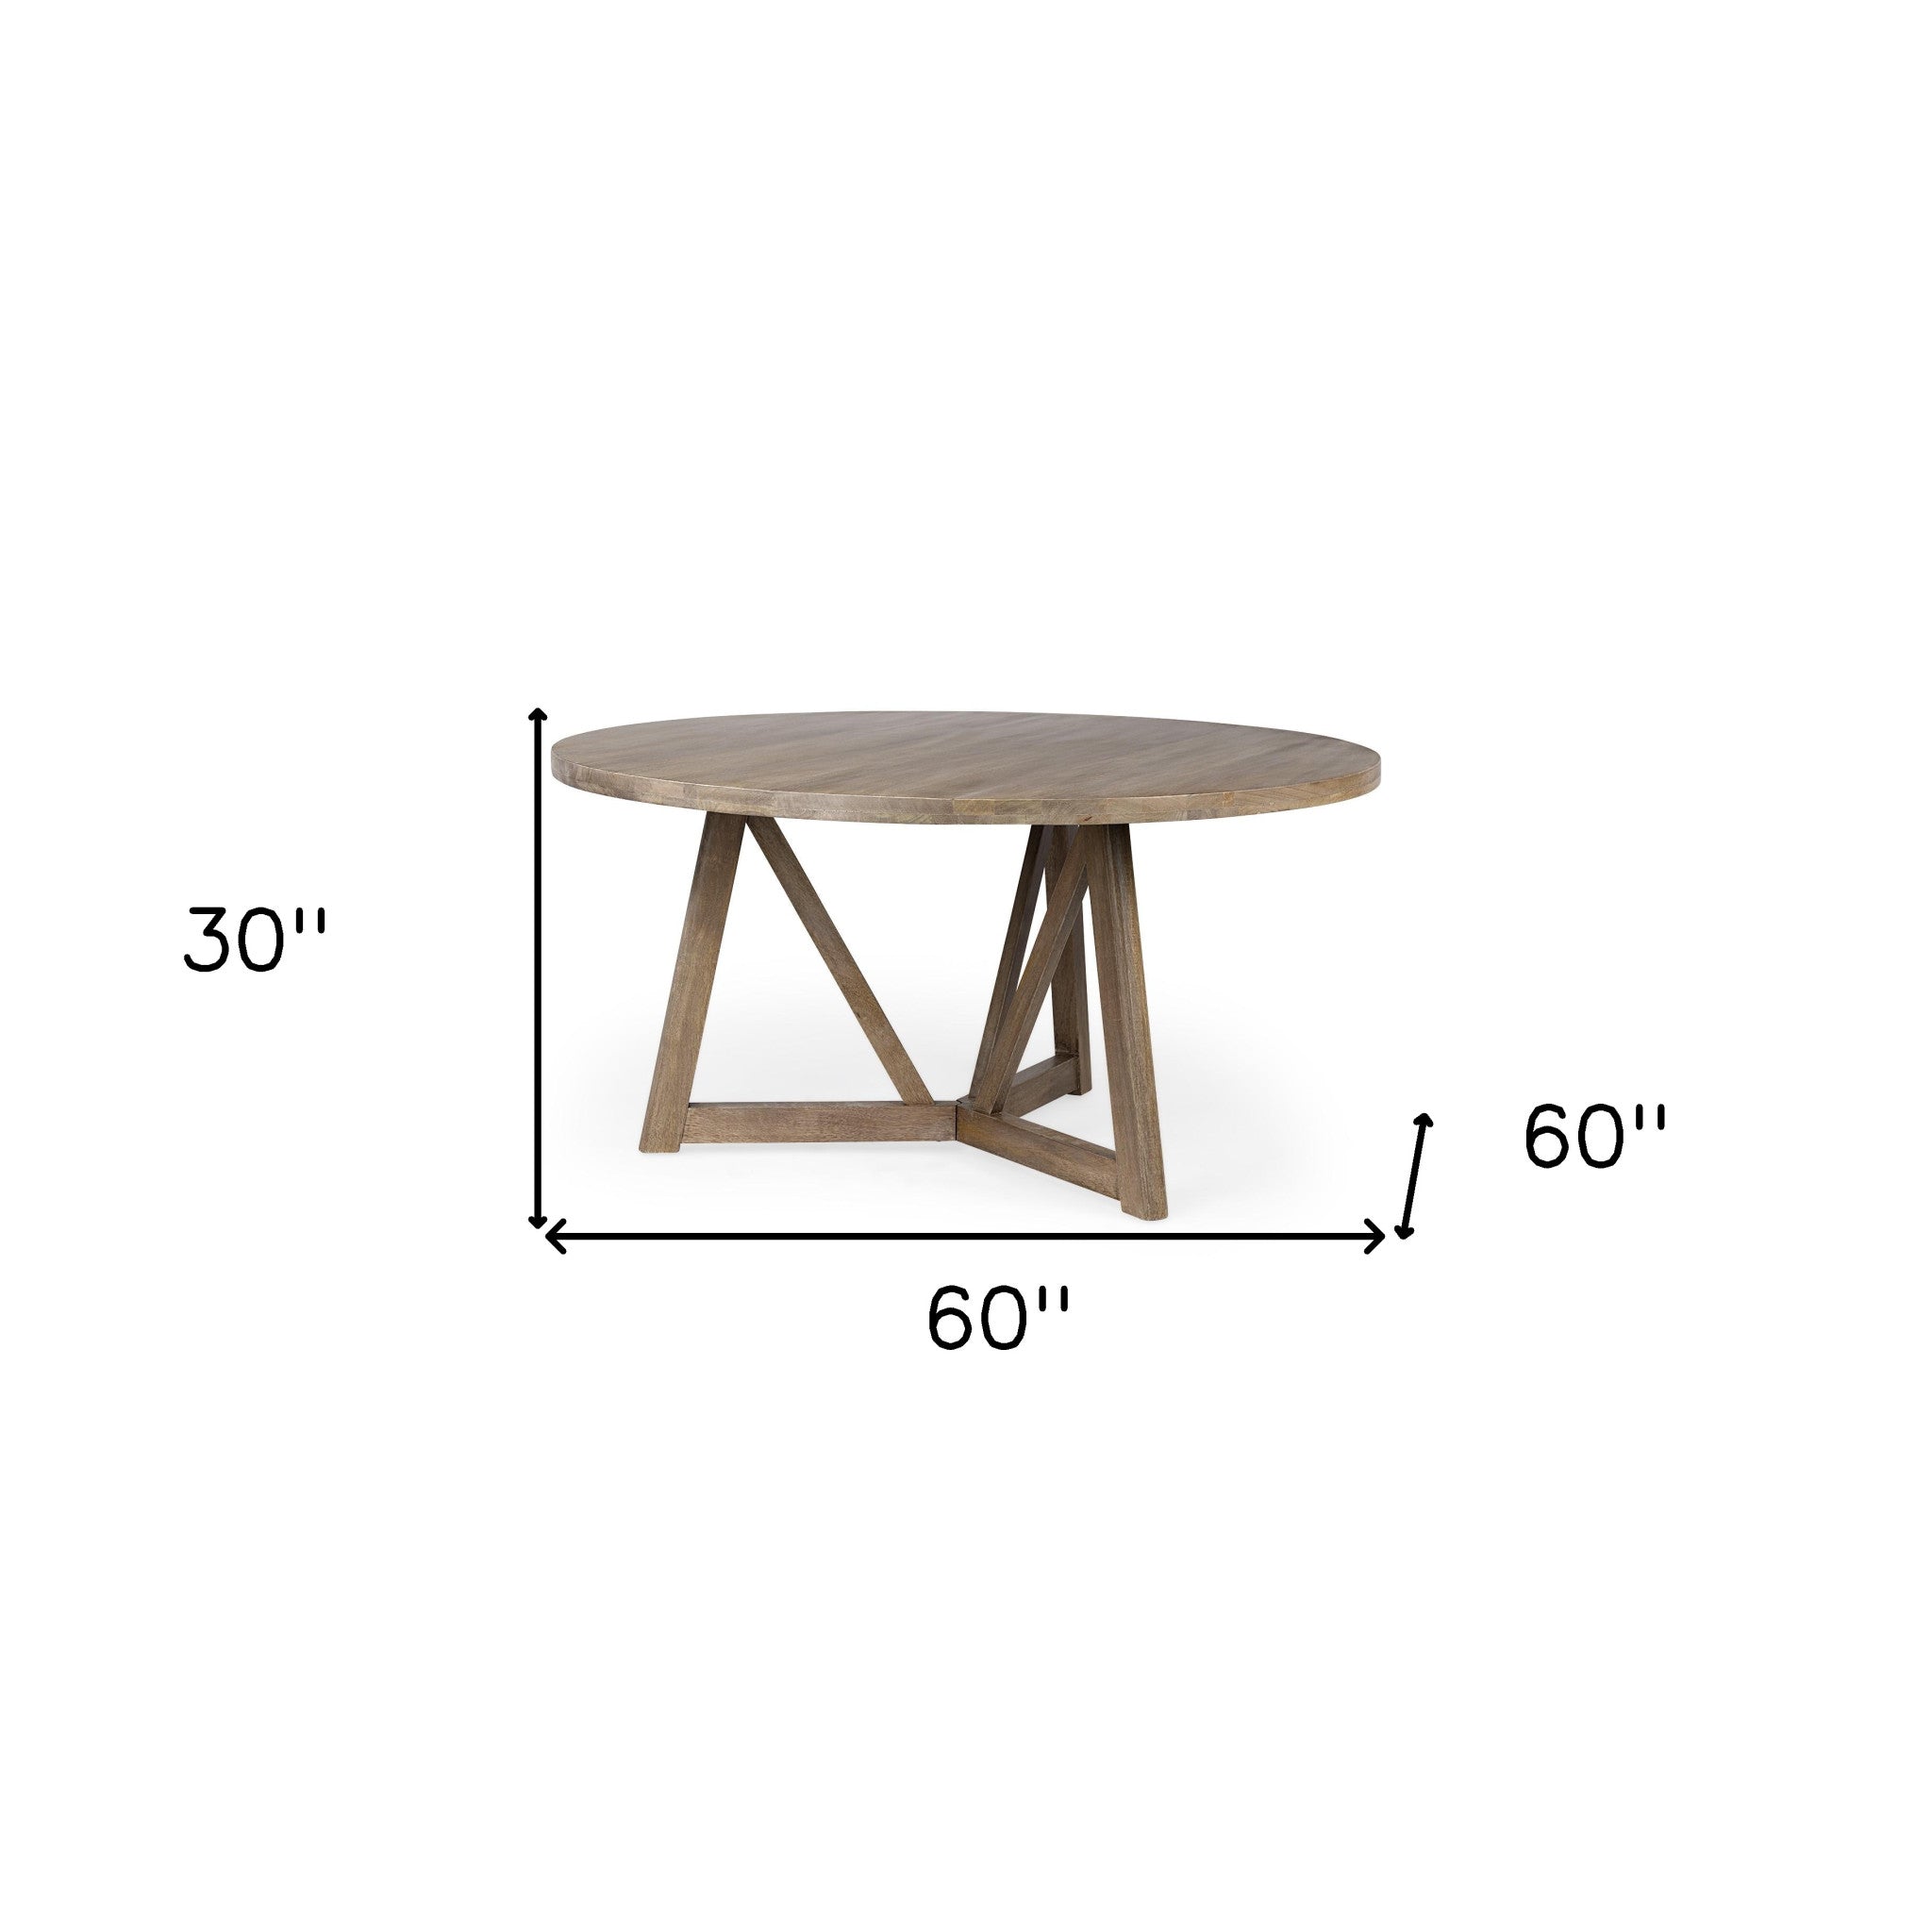 60" Round Brown Solid Wood Top And Base Dining Table